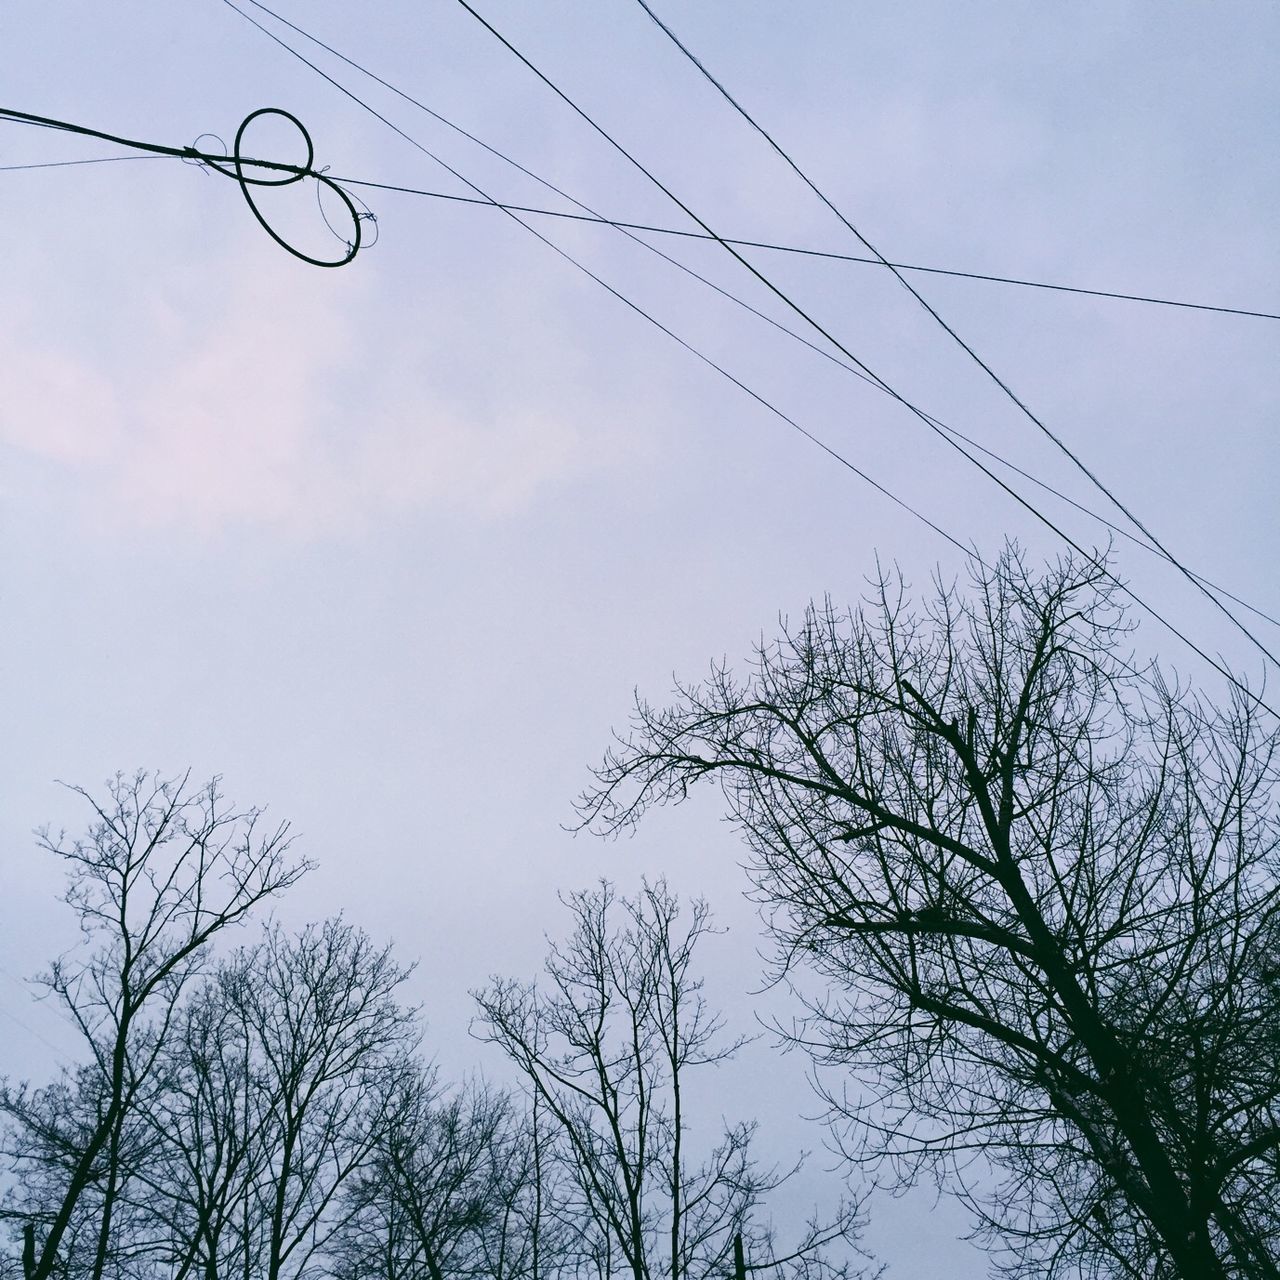 low angle view, power line, tree, cable, sky, bare tree, branch, clear sky, electricity pylon, silhouette, connection, electricity, bird, power supply, nature, tranquility, power cable, outdoors, no people, day